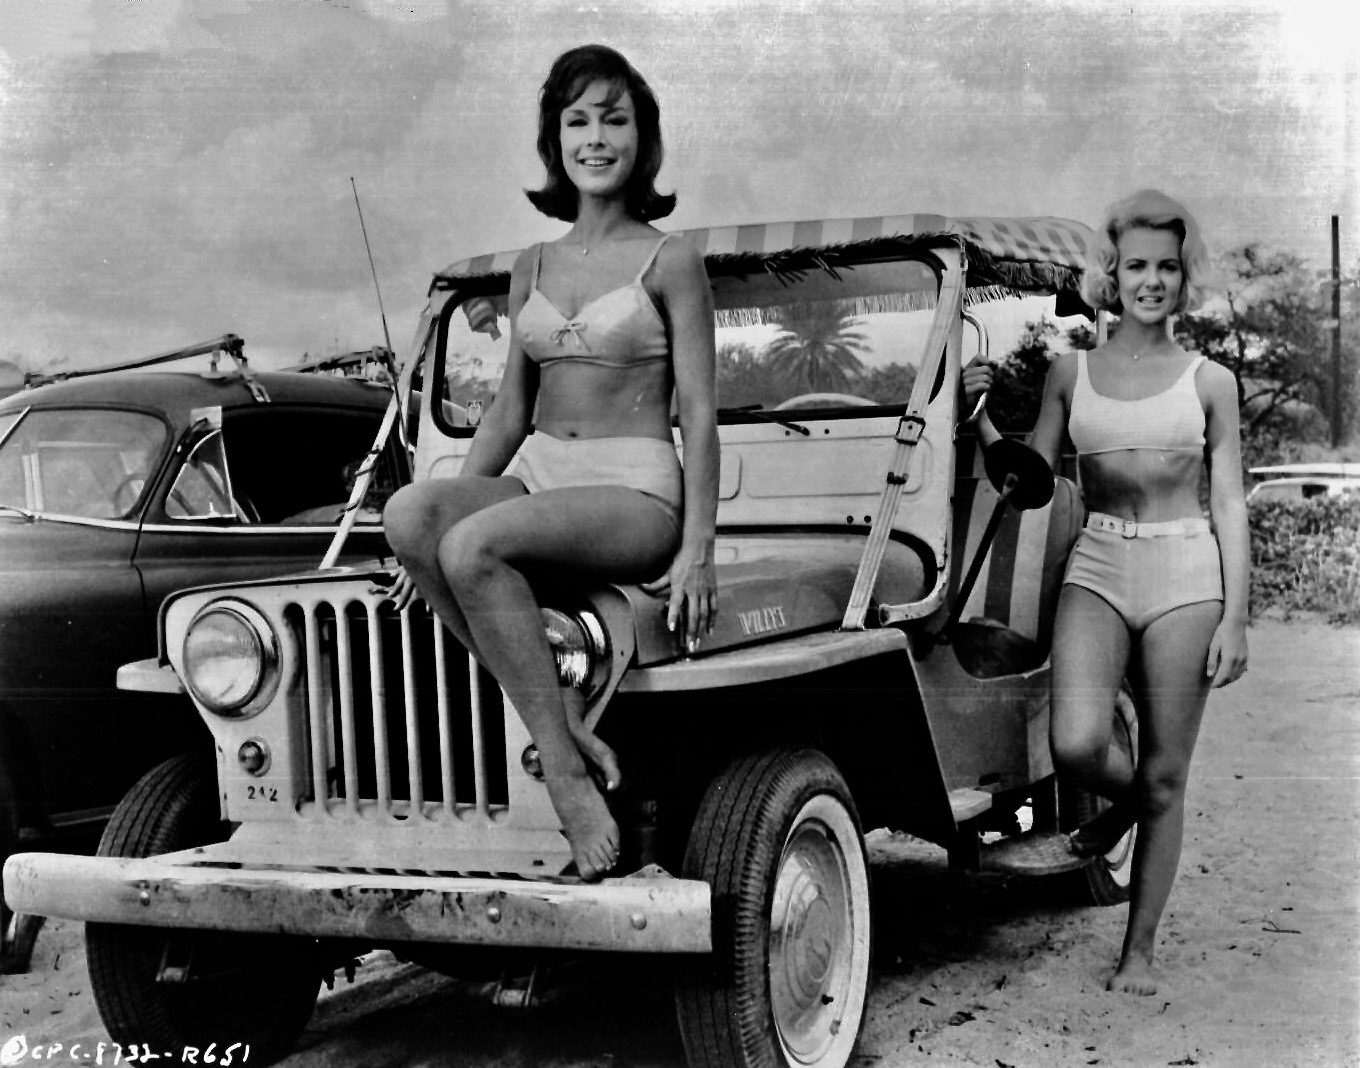 Barbara Eden and Shelley Fabares in Ride the wild surf, 1964